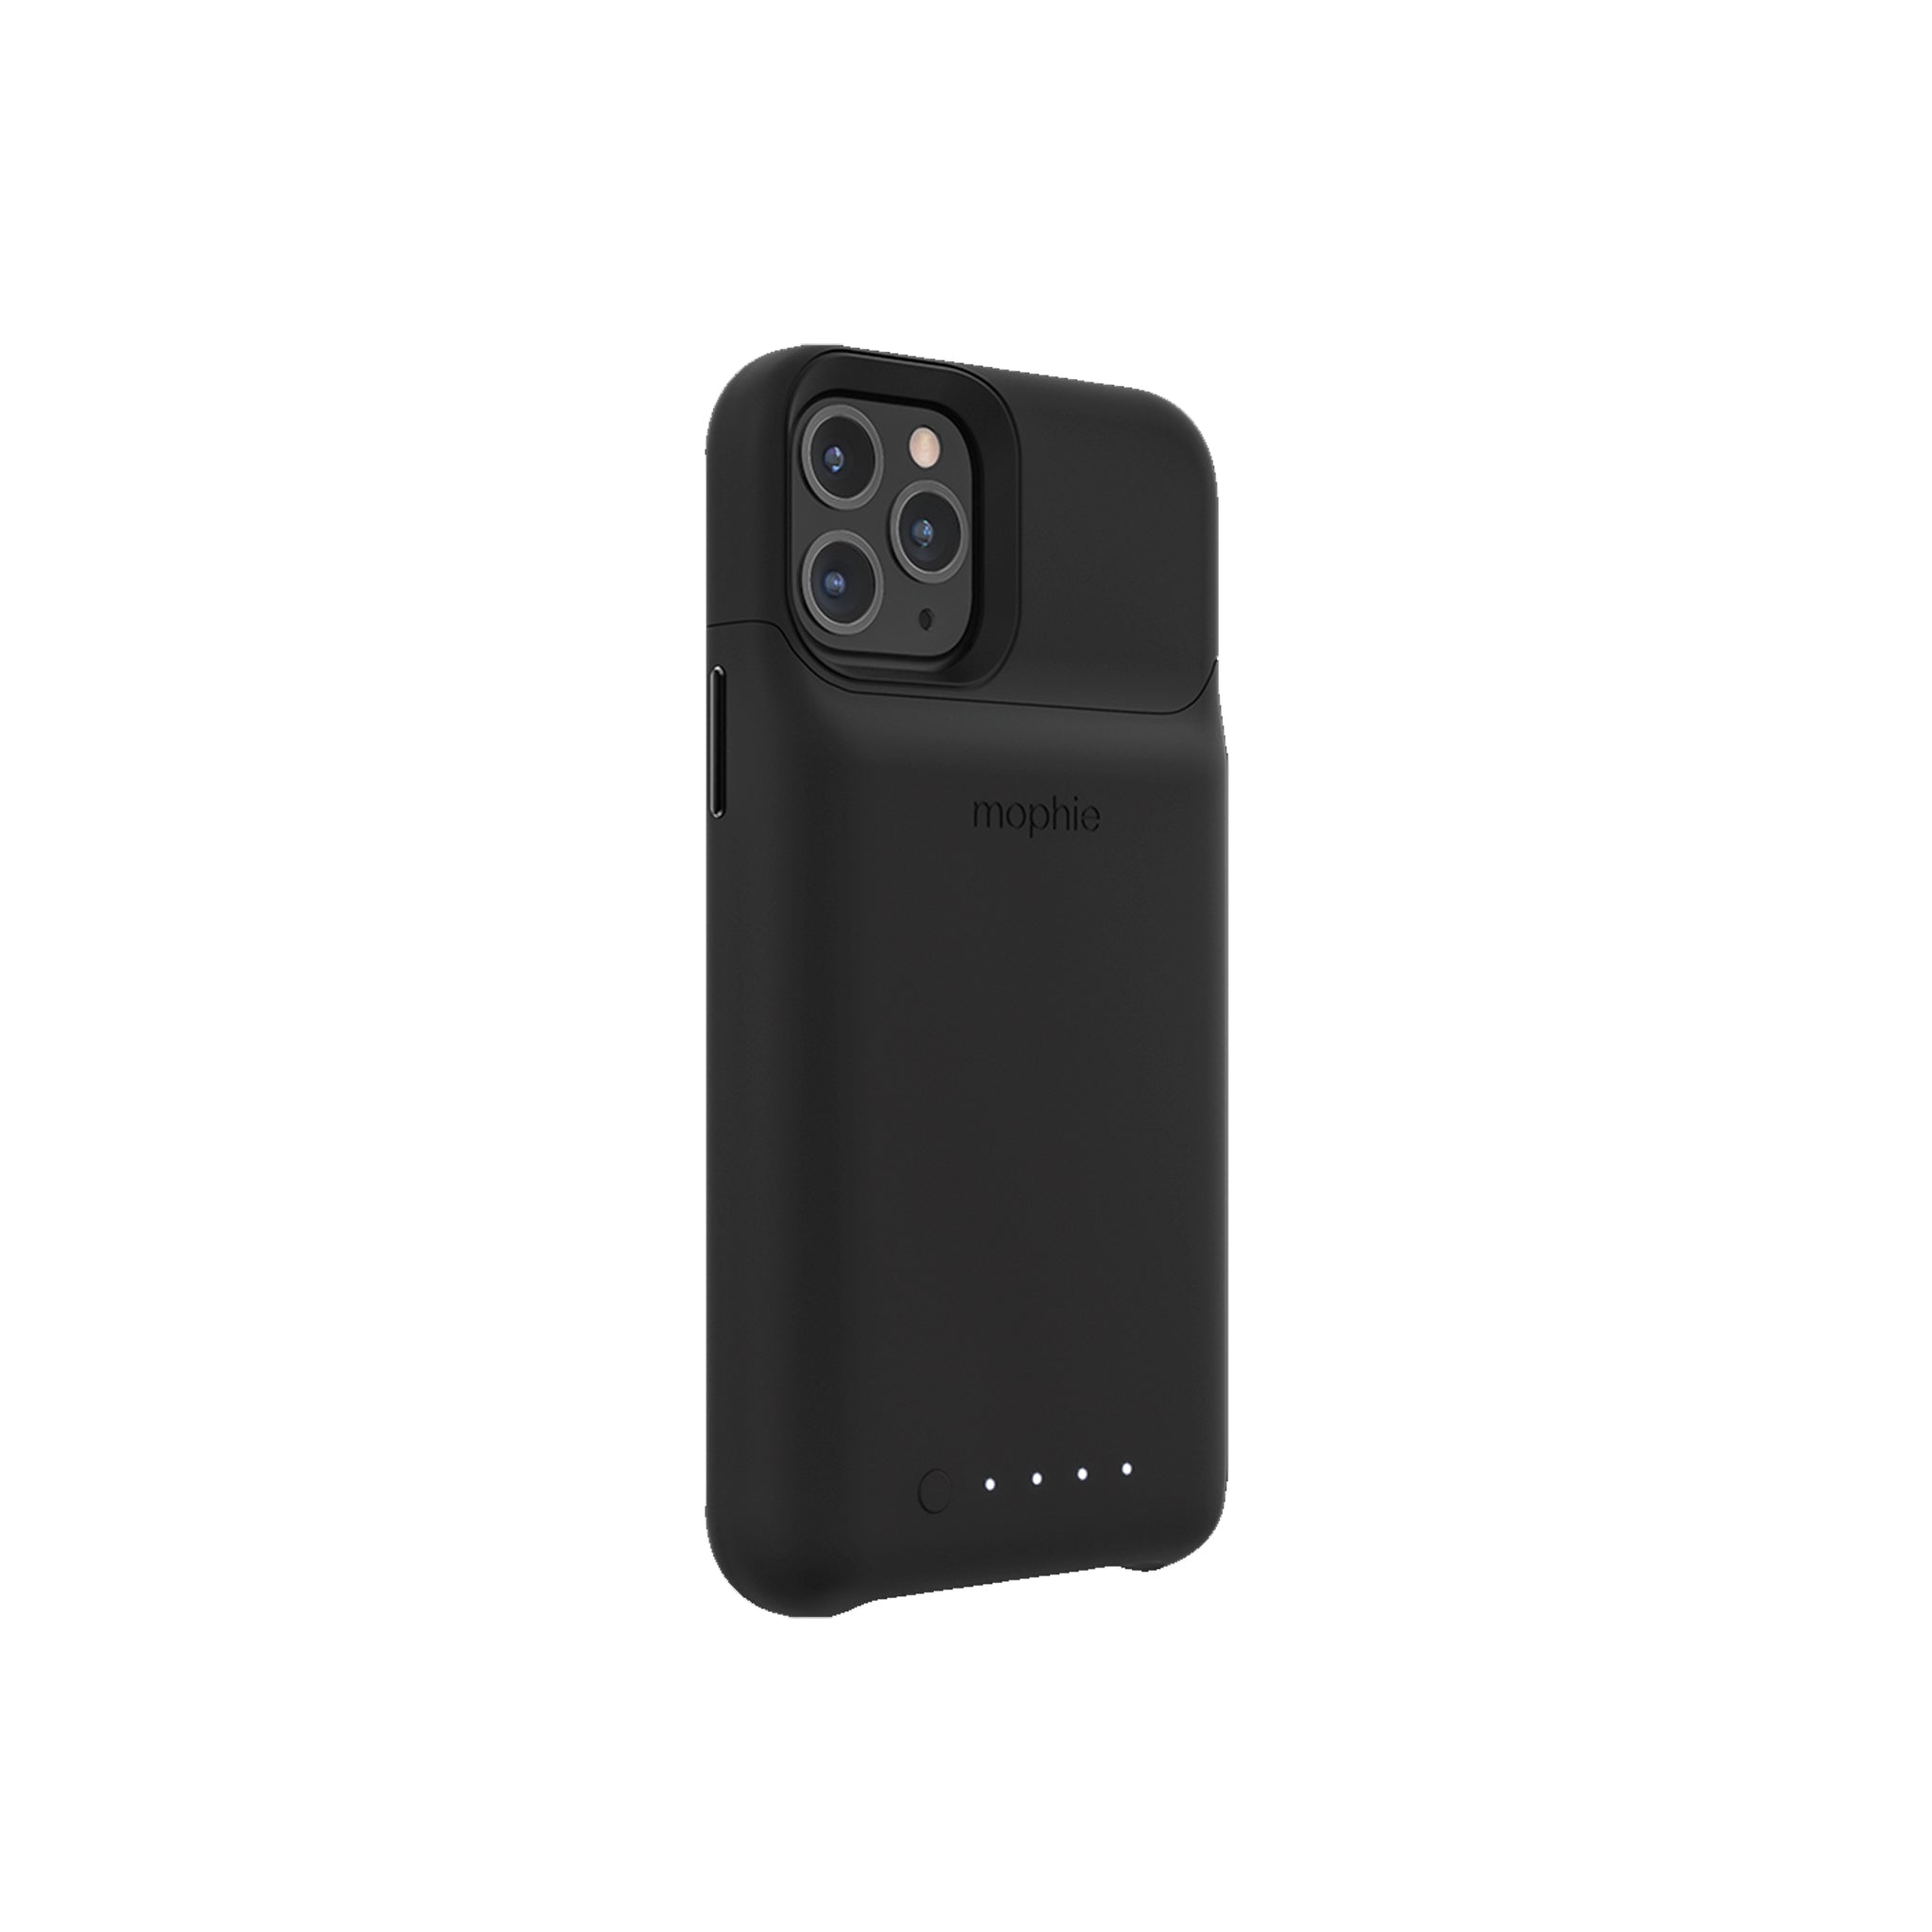 Mophie - Juice Pack Access Power Bank Case 2,000 Mah For Apple Iphone 11 Pro - Black